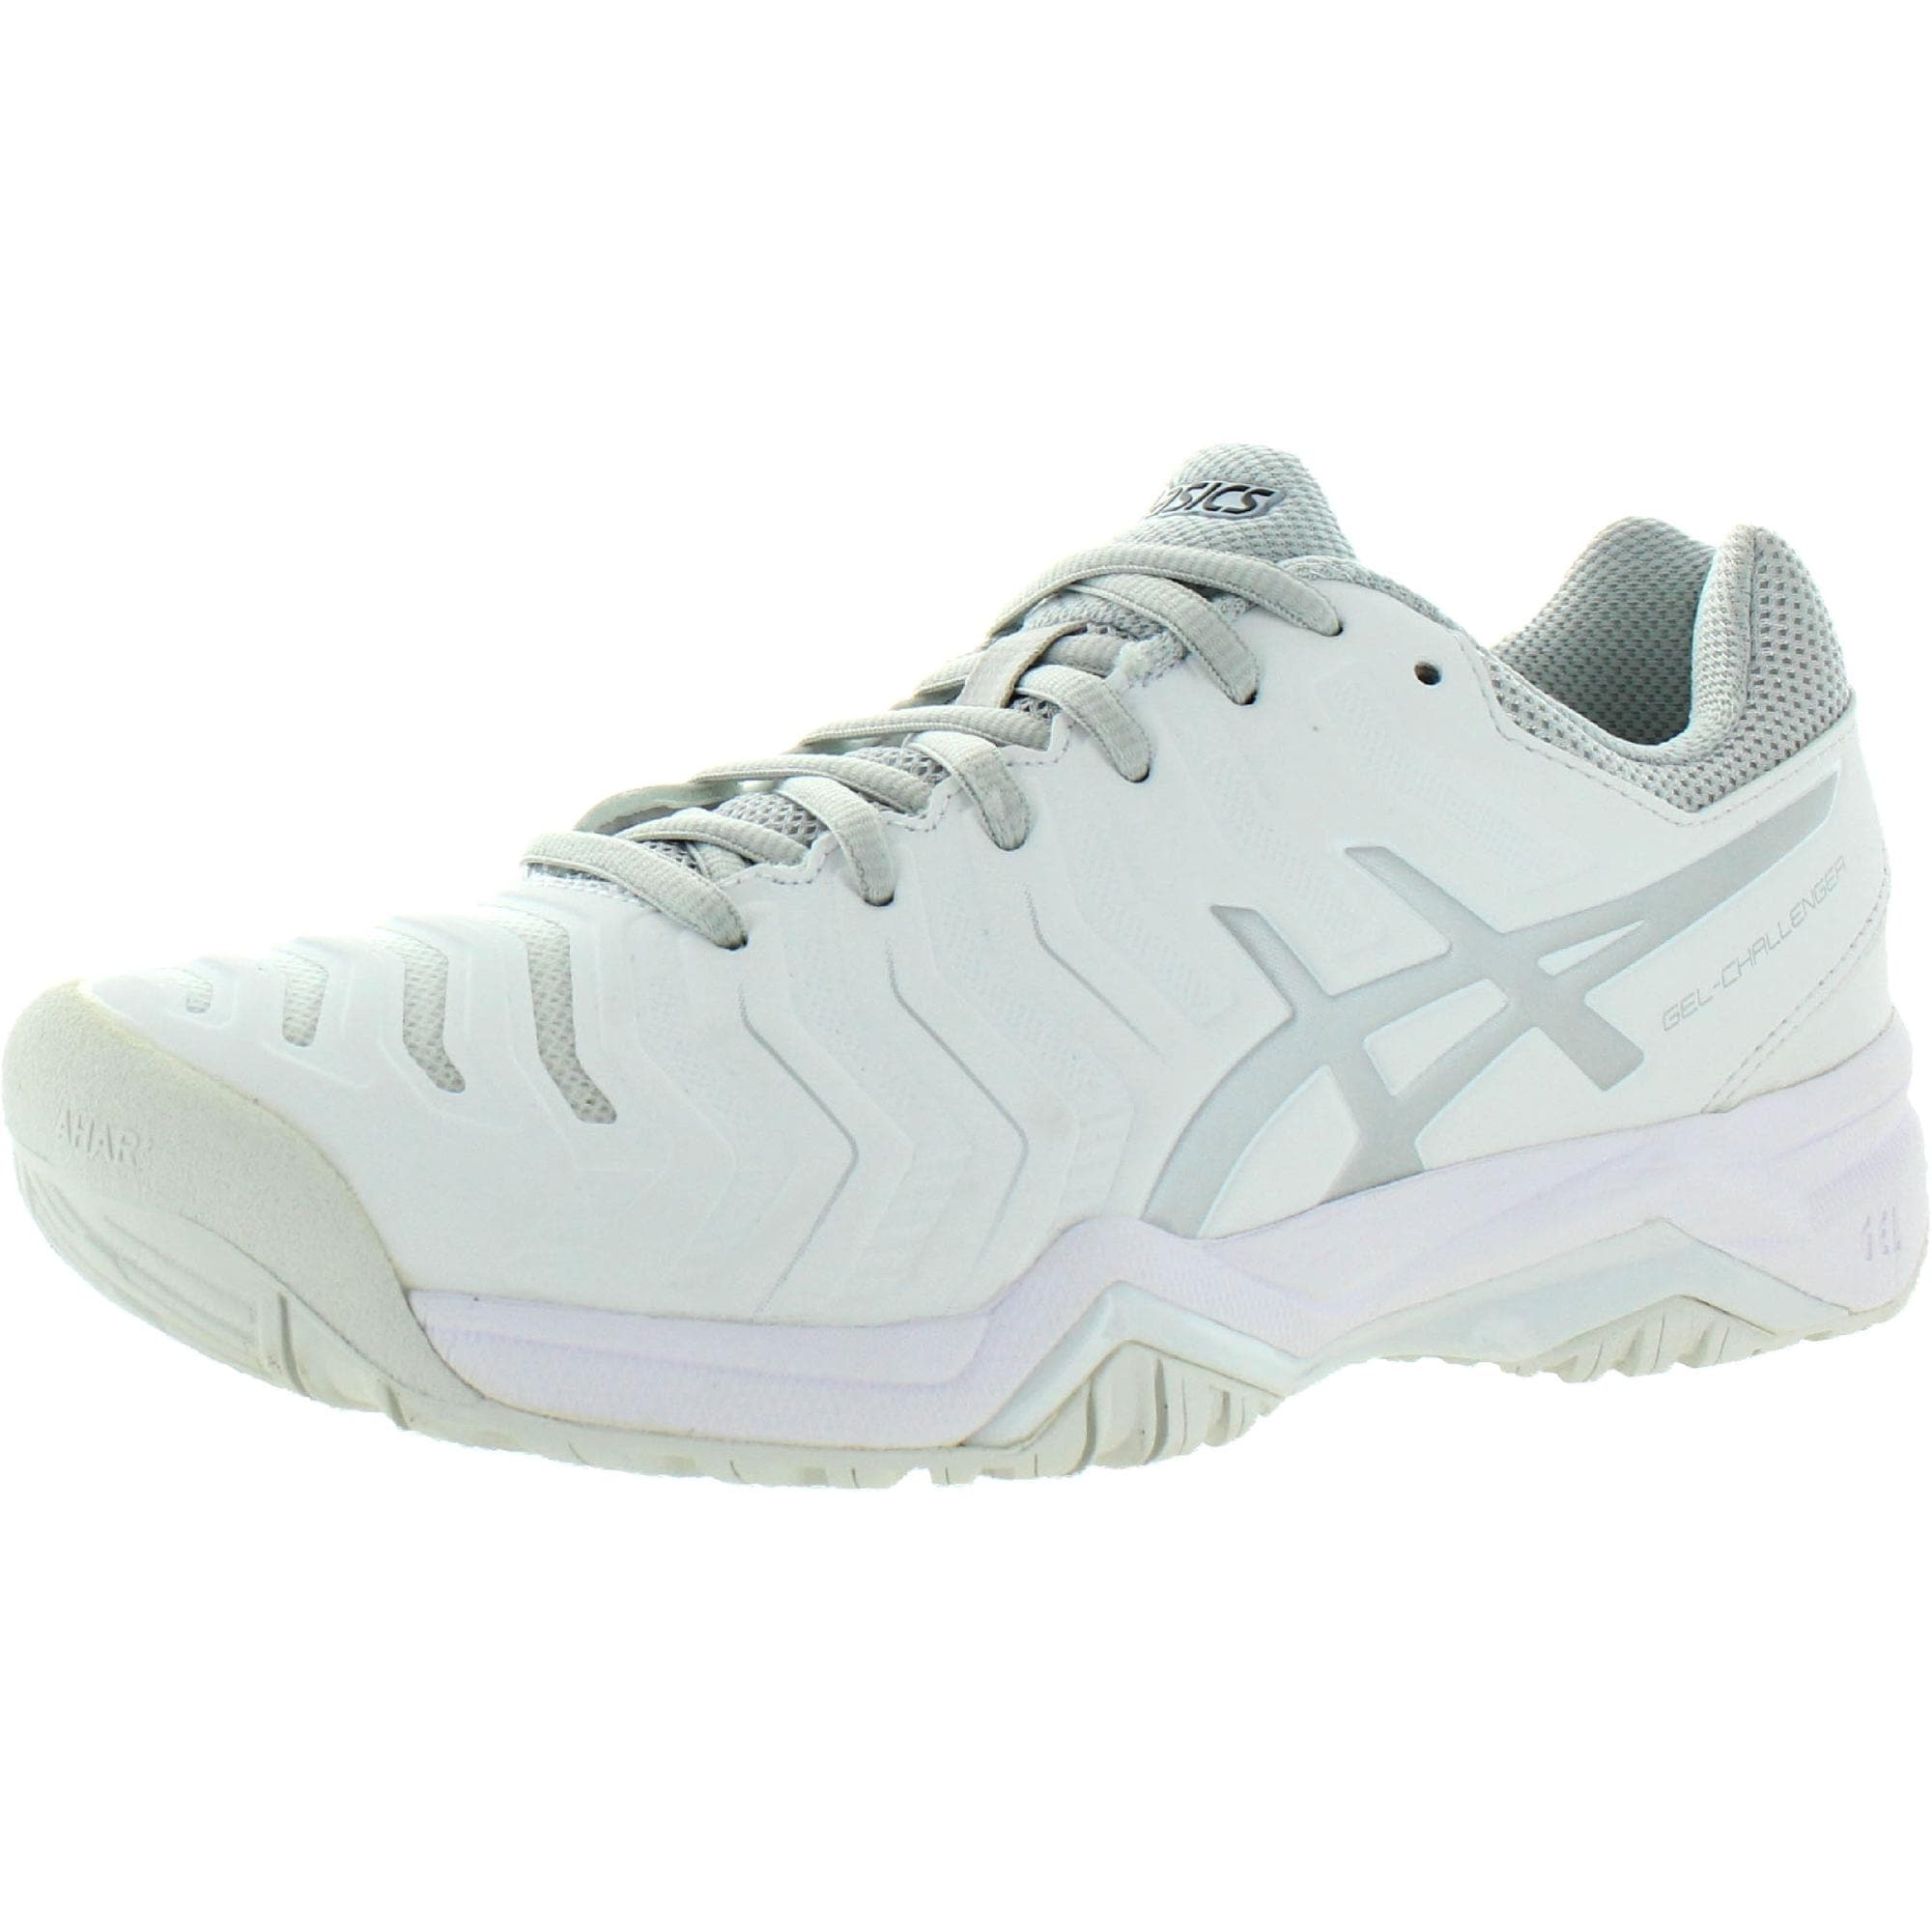 Asics Lifestyle Mens Shoes Factory SAVE 55%.